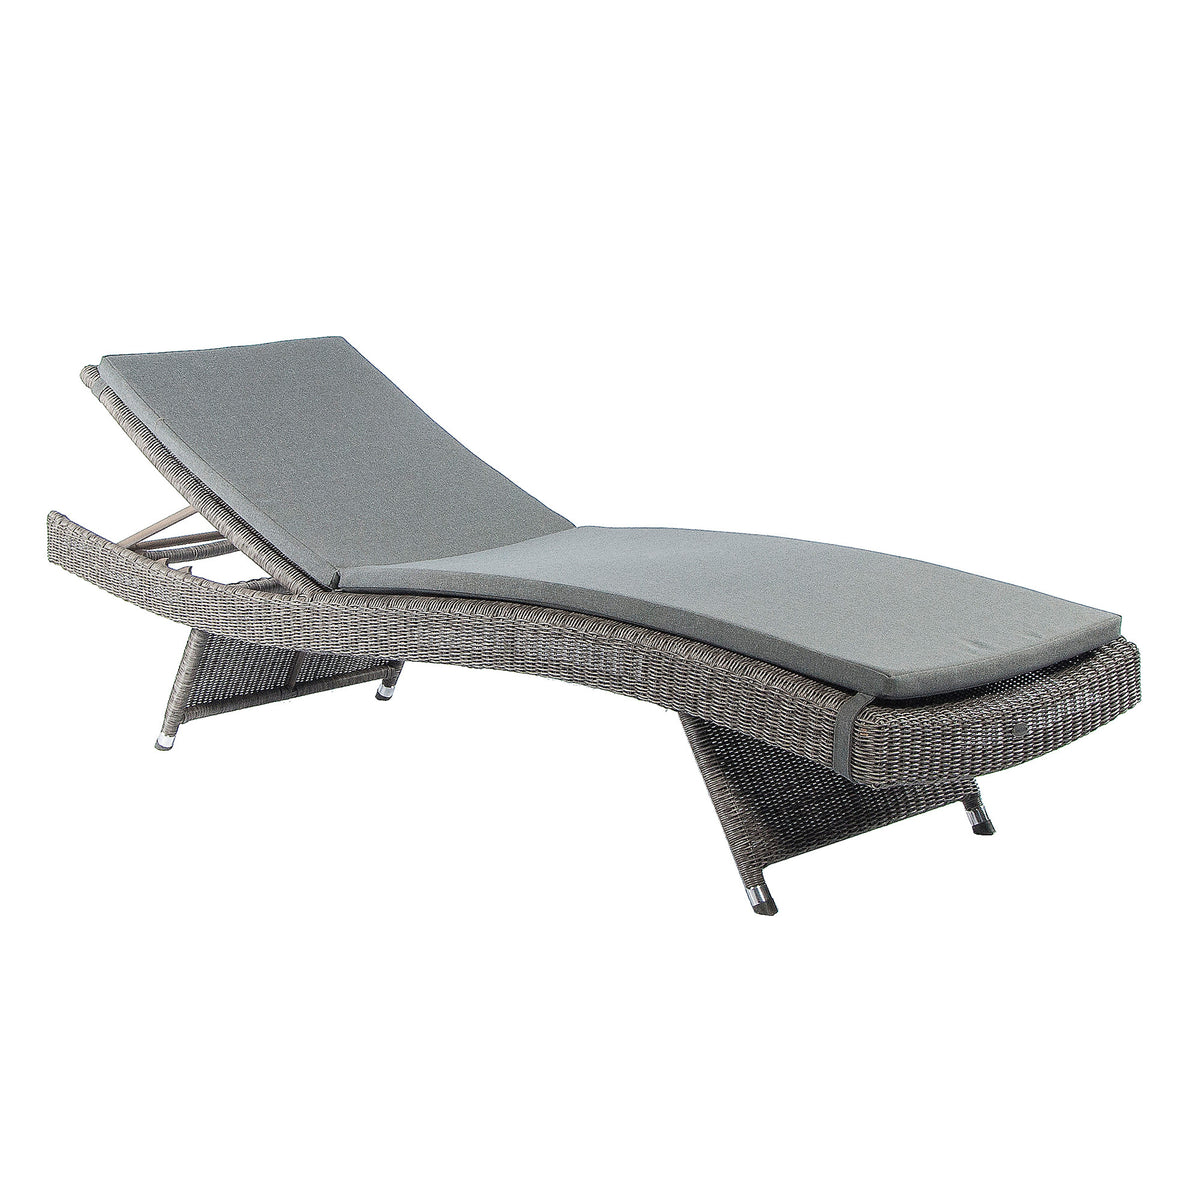 Alexander Rose Monte Carlo Folding Sunbed with Cushion